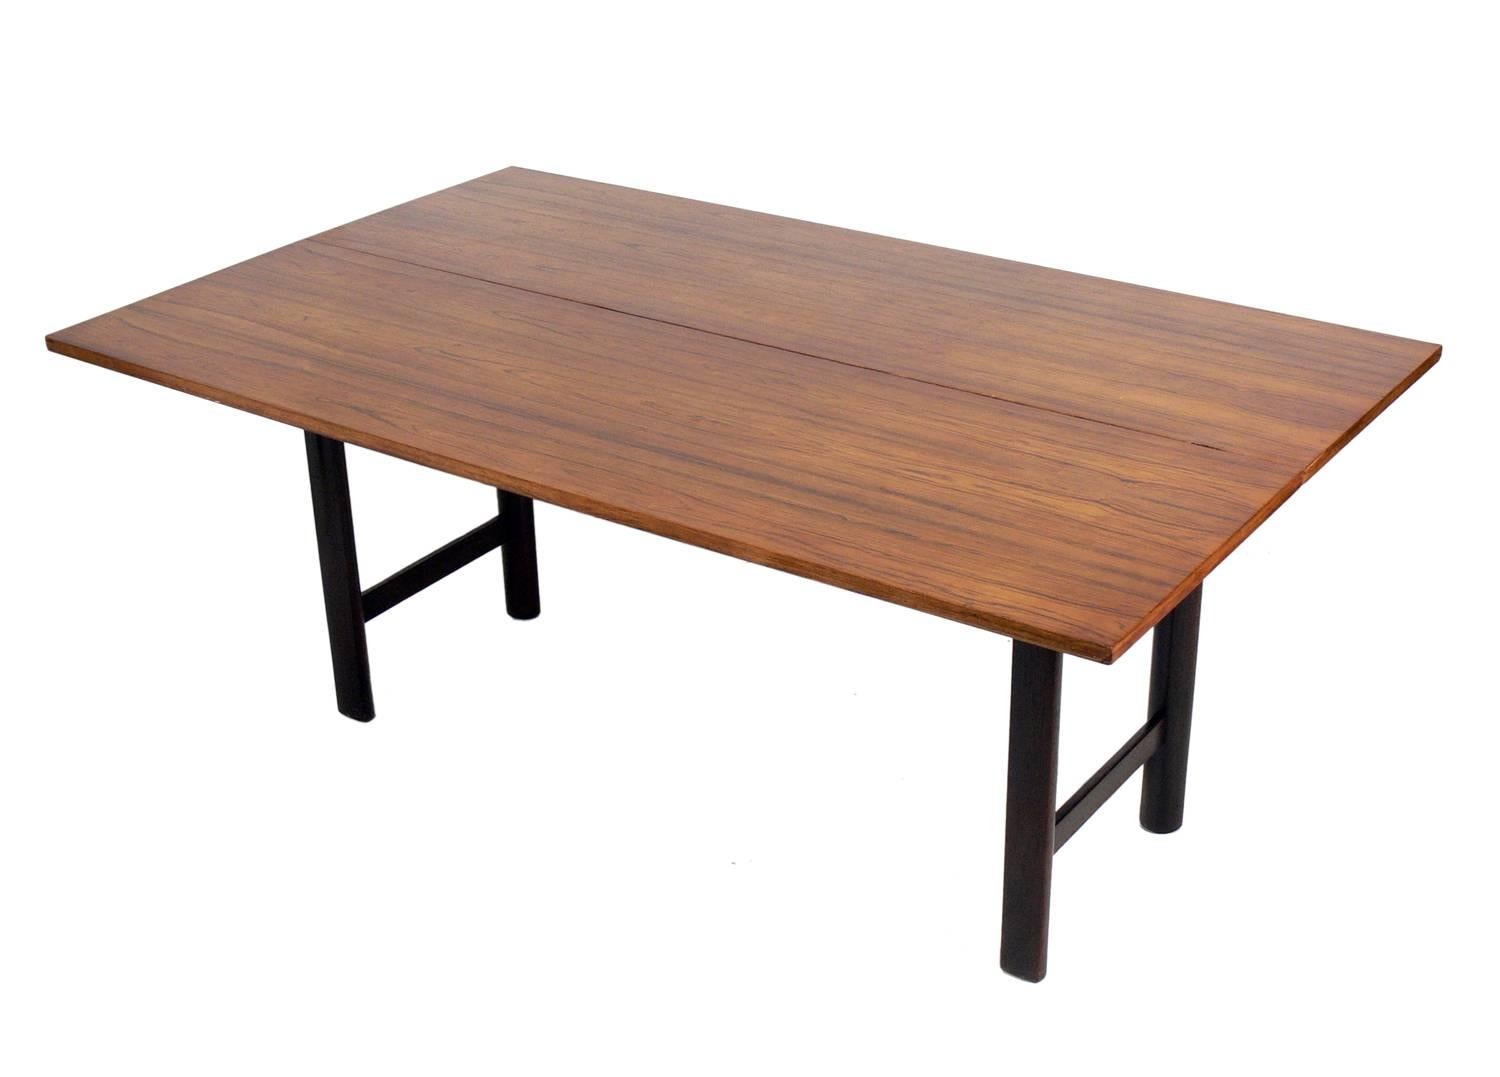 Ingenious rosewood console or dining table, designed by Edward Wormley for Dunbar, circa 1950s. This clean lined console table quickly and easily opens to a full size dining table. With a simple flip and slide, it goes from 20